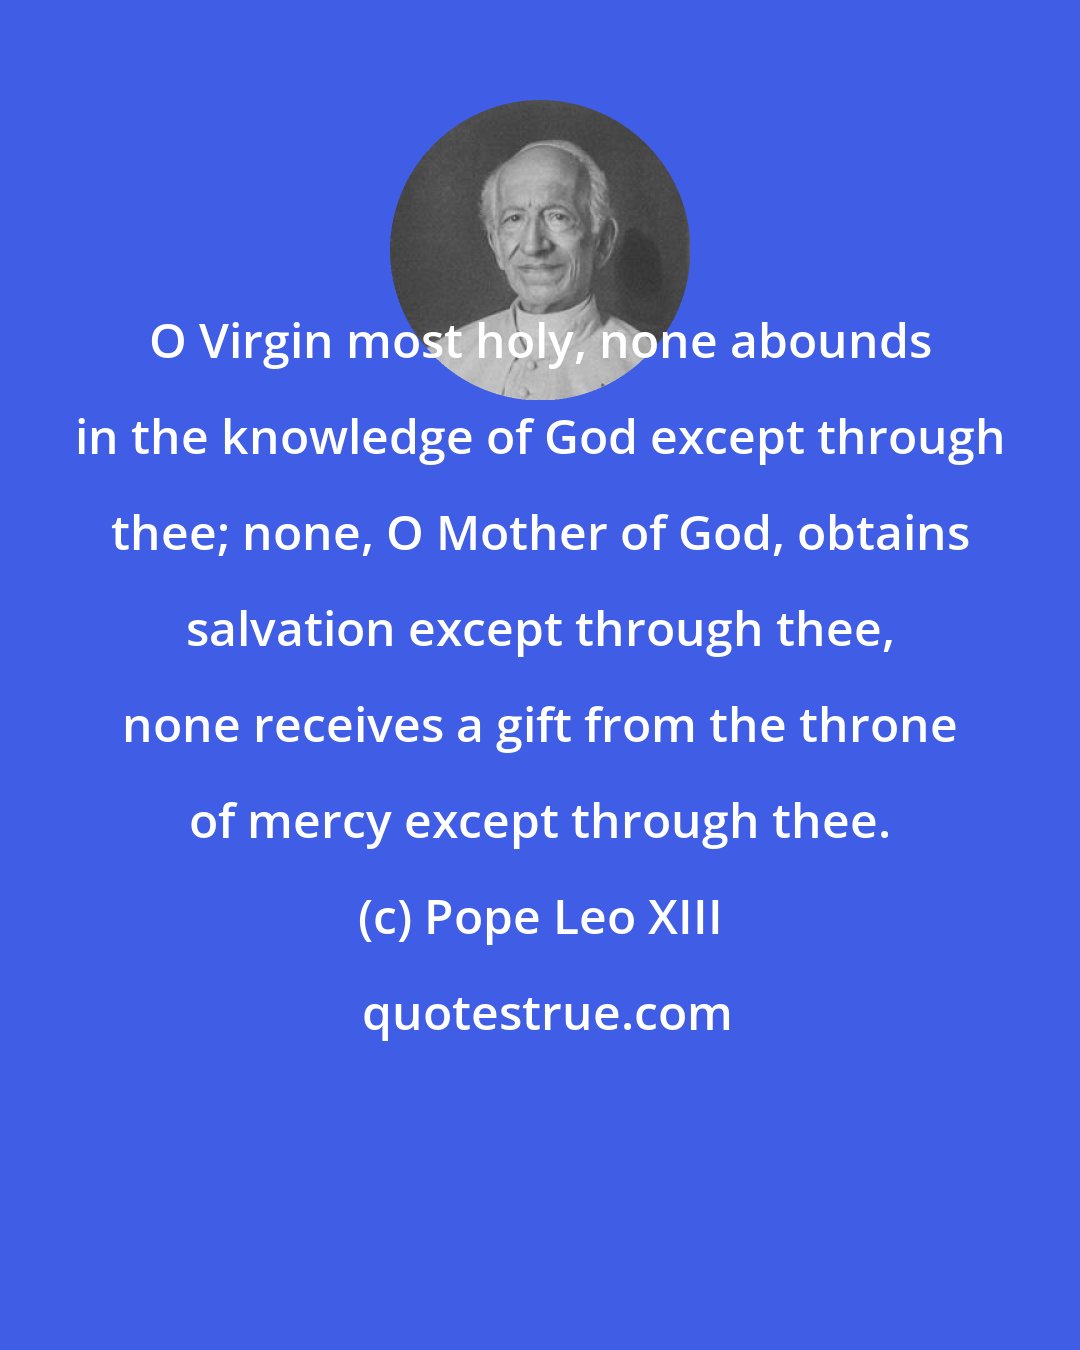 Pope Leo XIII: O Virgin most holy, none abounds in the knowledge of God except through thee; none, O Mother of God, obtains salvation except through thee, none receives a gift from the throne of mercy except through thee.